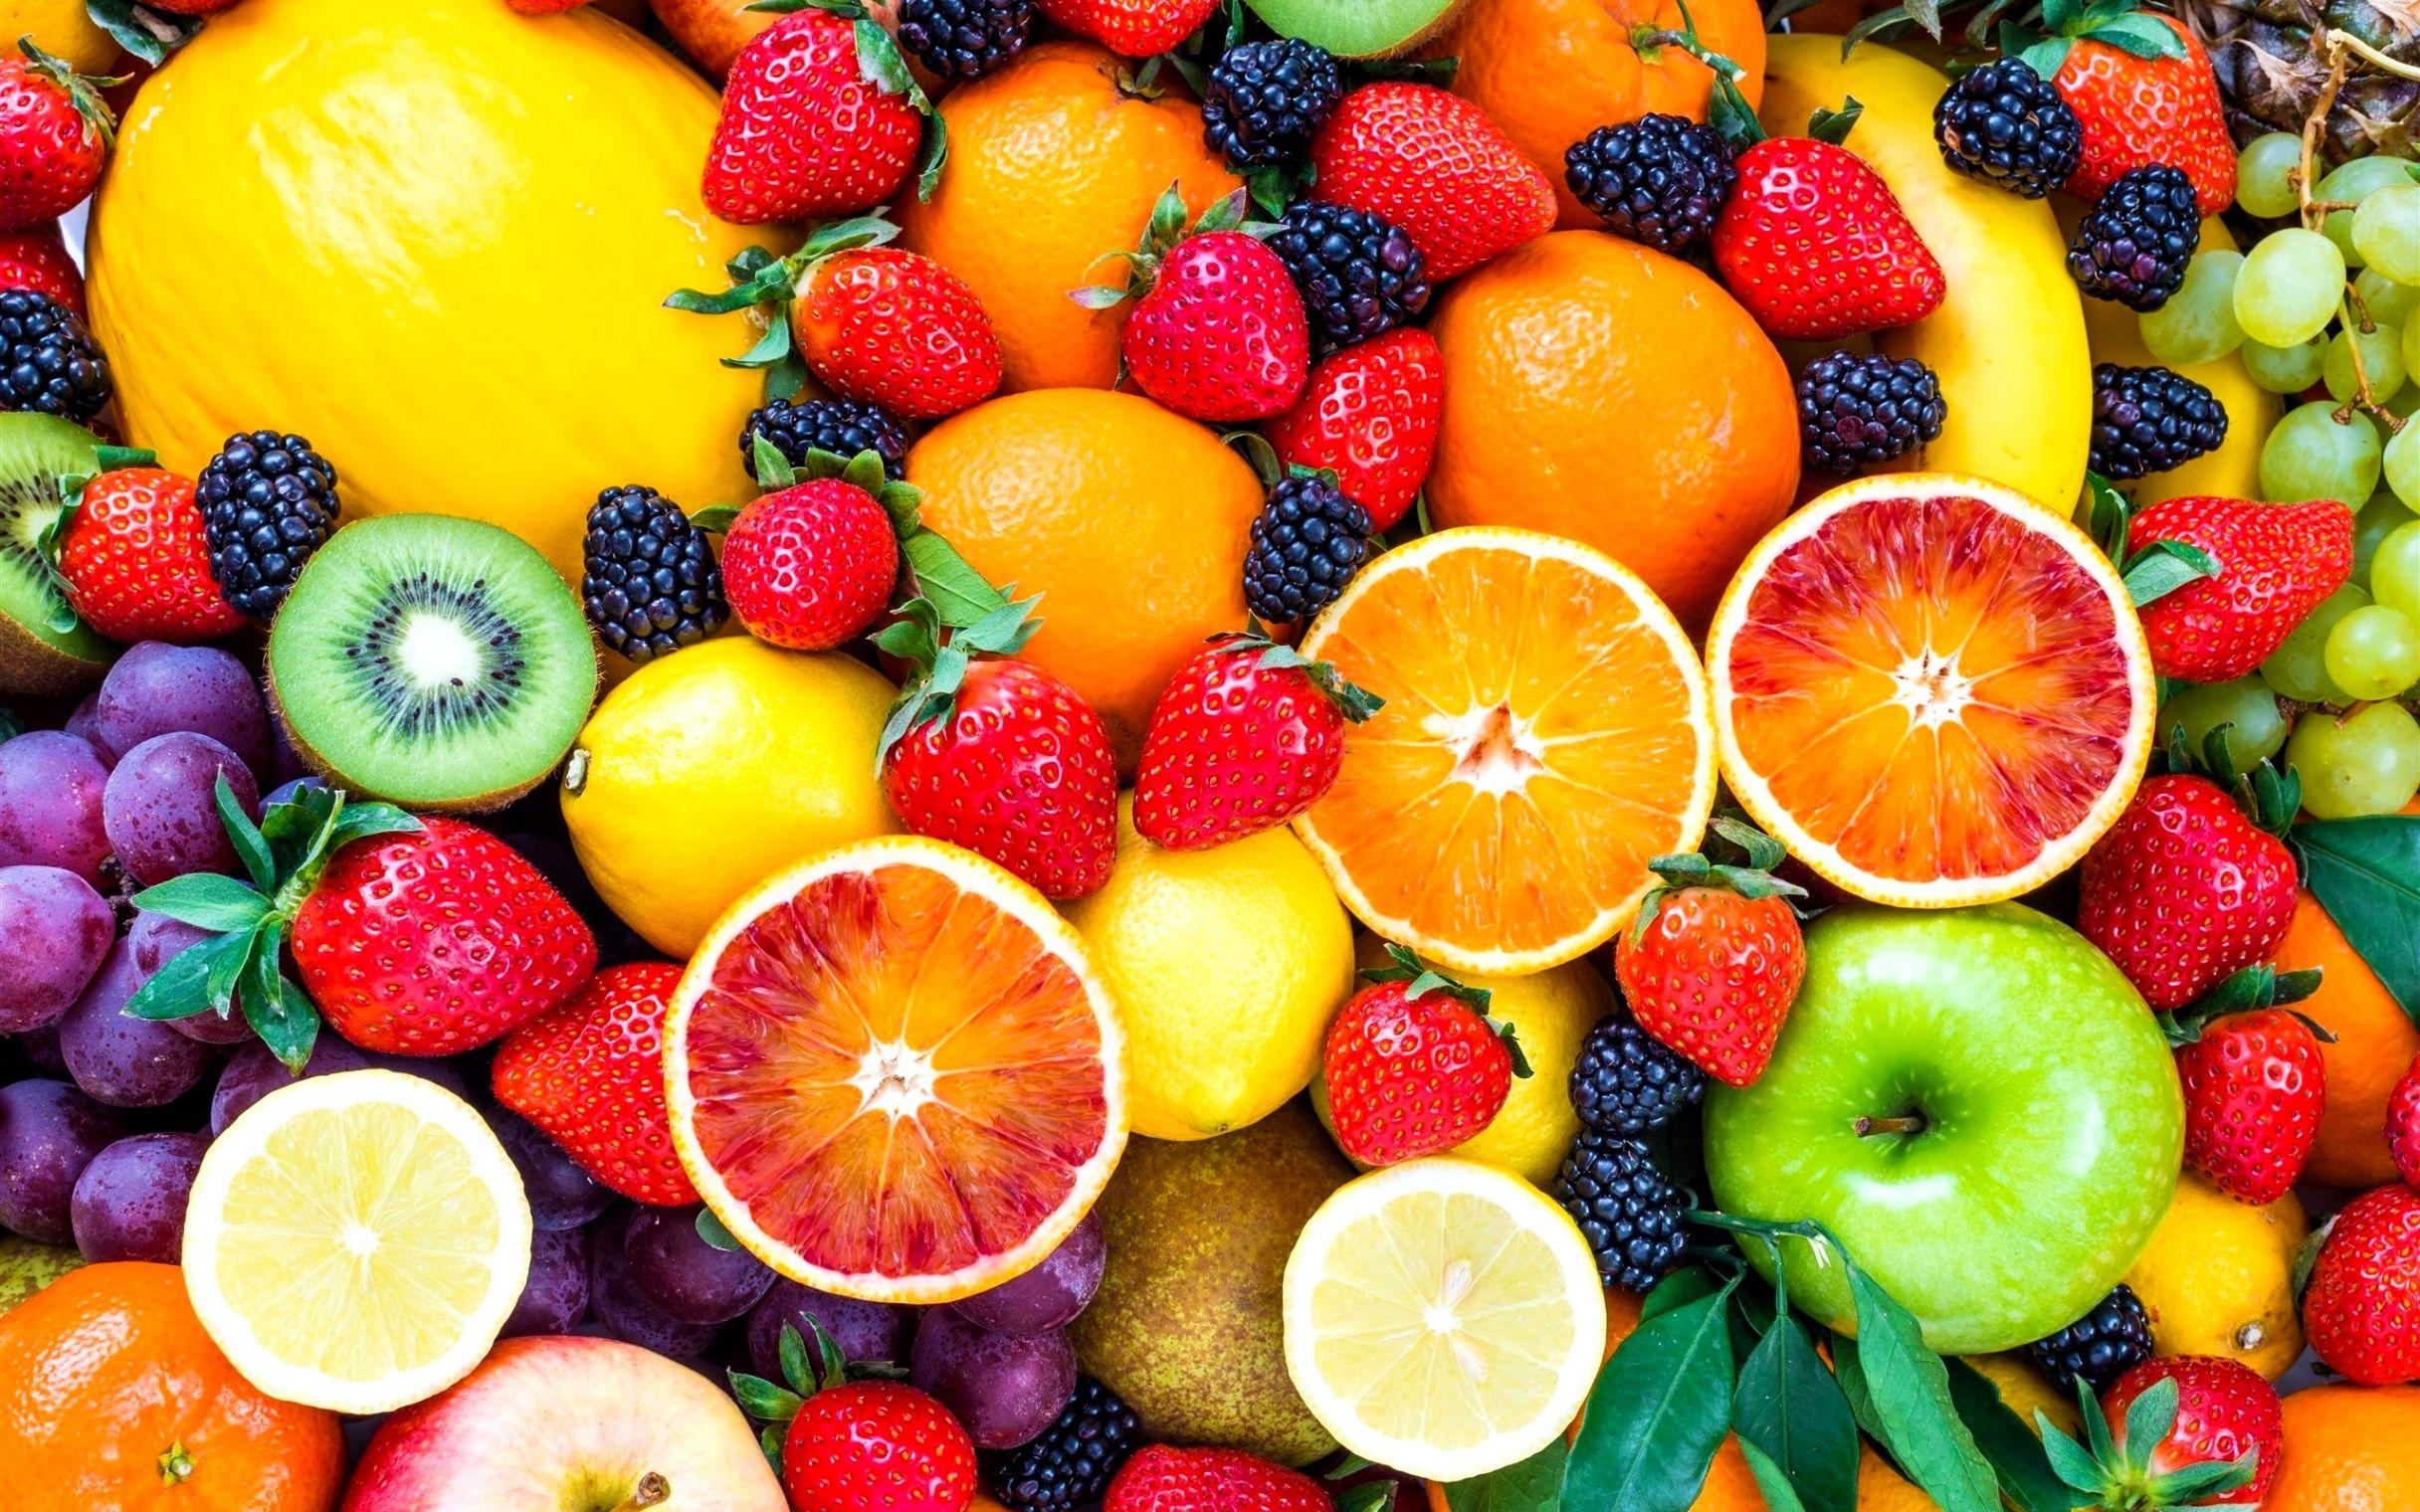 Fruit Wallpaper 3 Other Amazing Wallpaper All Fruits 1920×1080